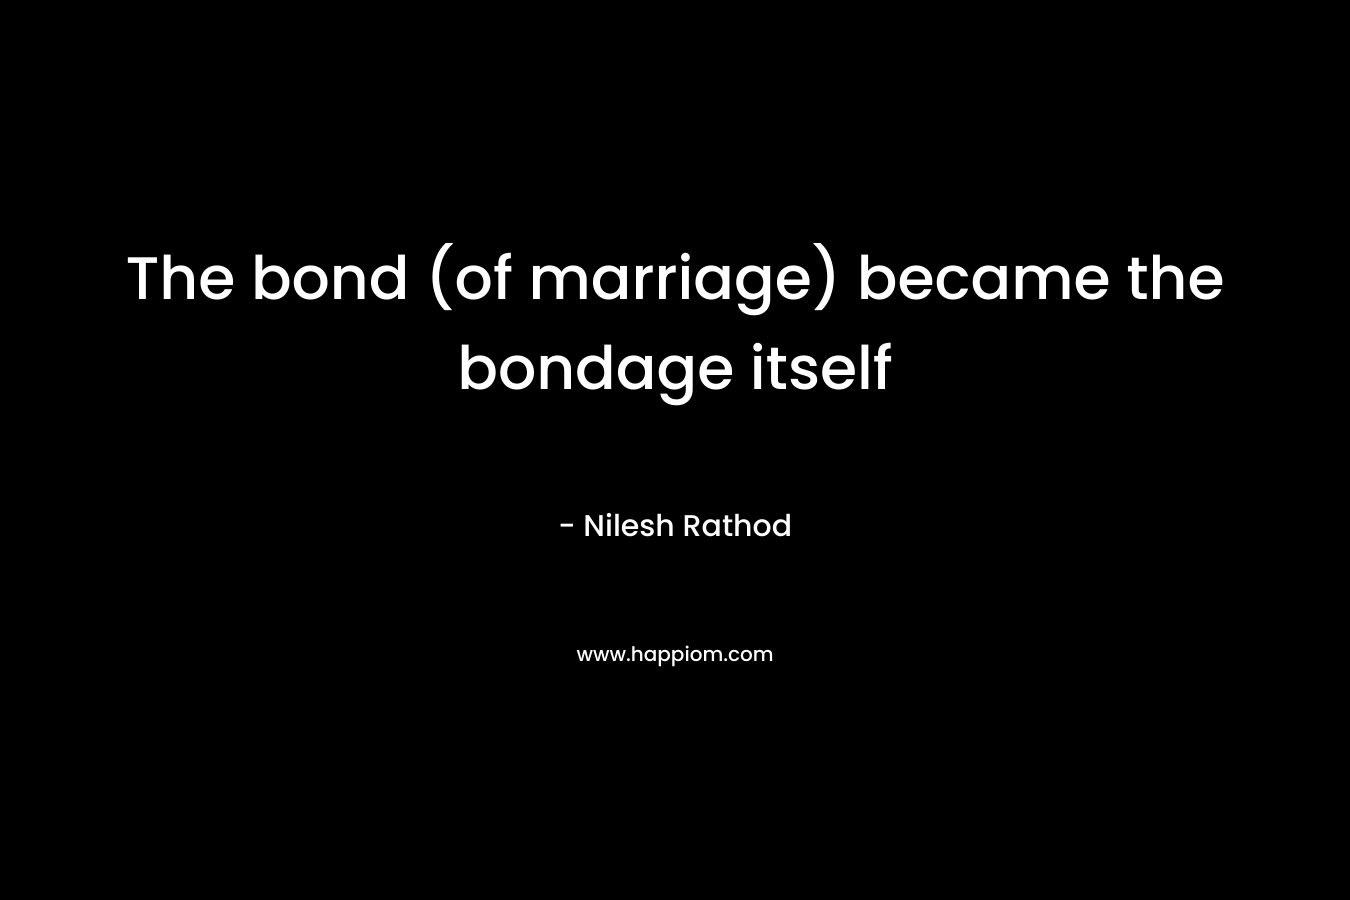 The bond (of marriage) became the bondage itself